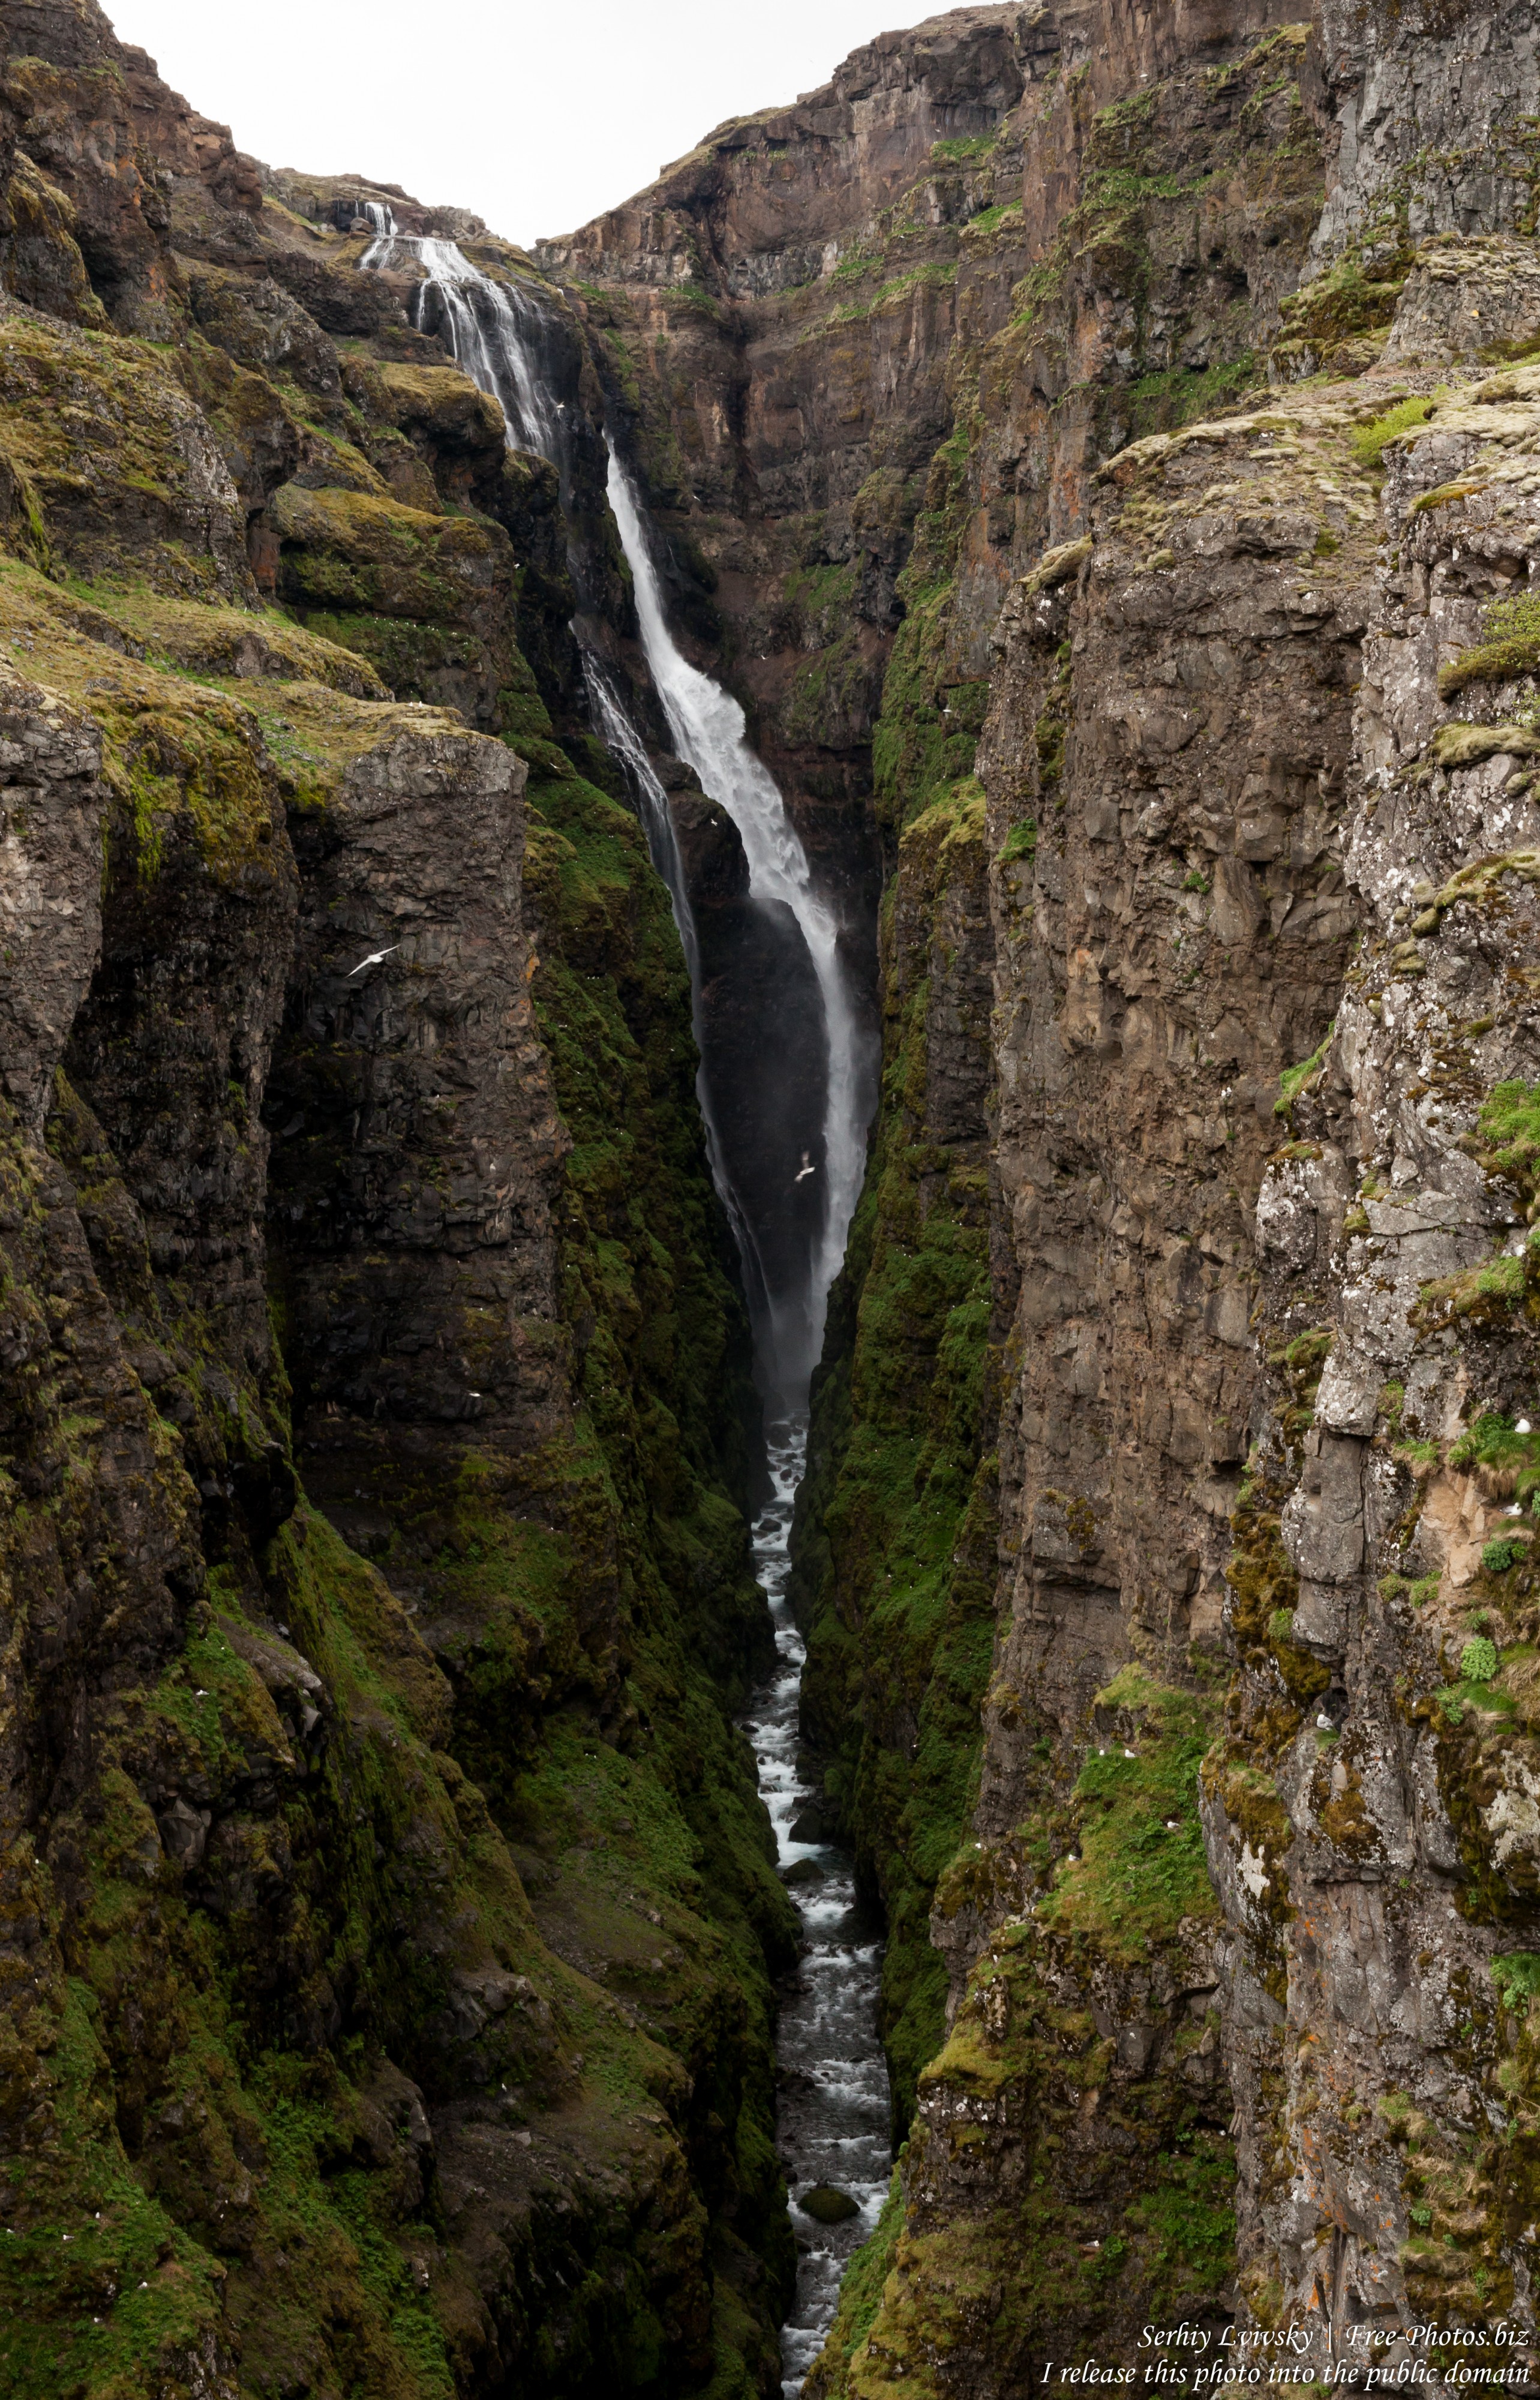 Glymur, Iceland, photographed in May 2019 by Serhiy Lvivsky, picture 5